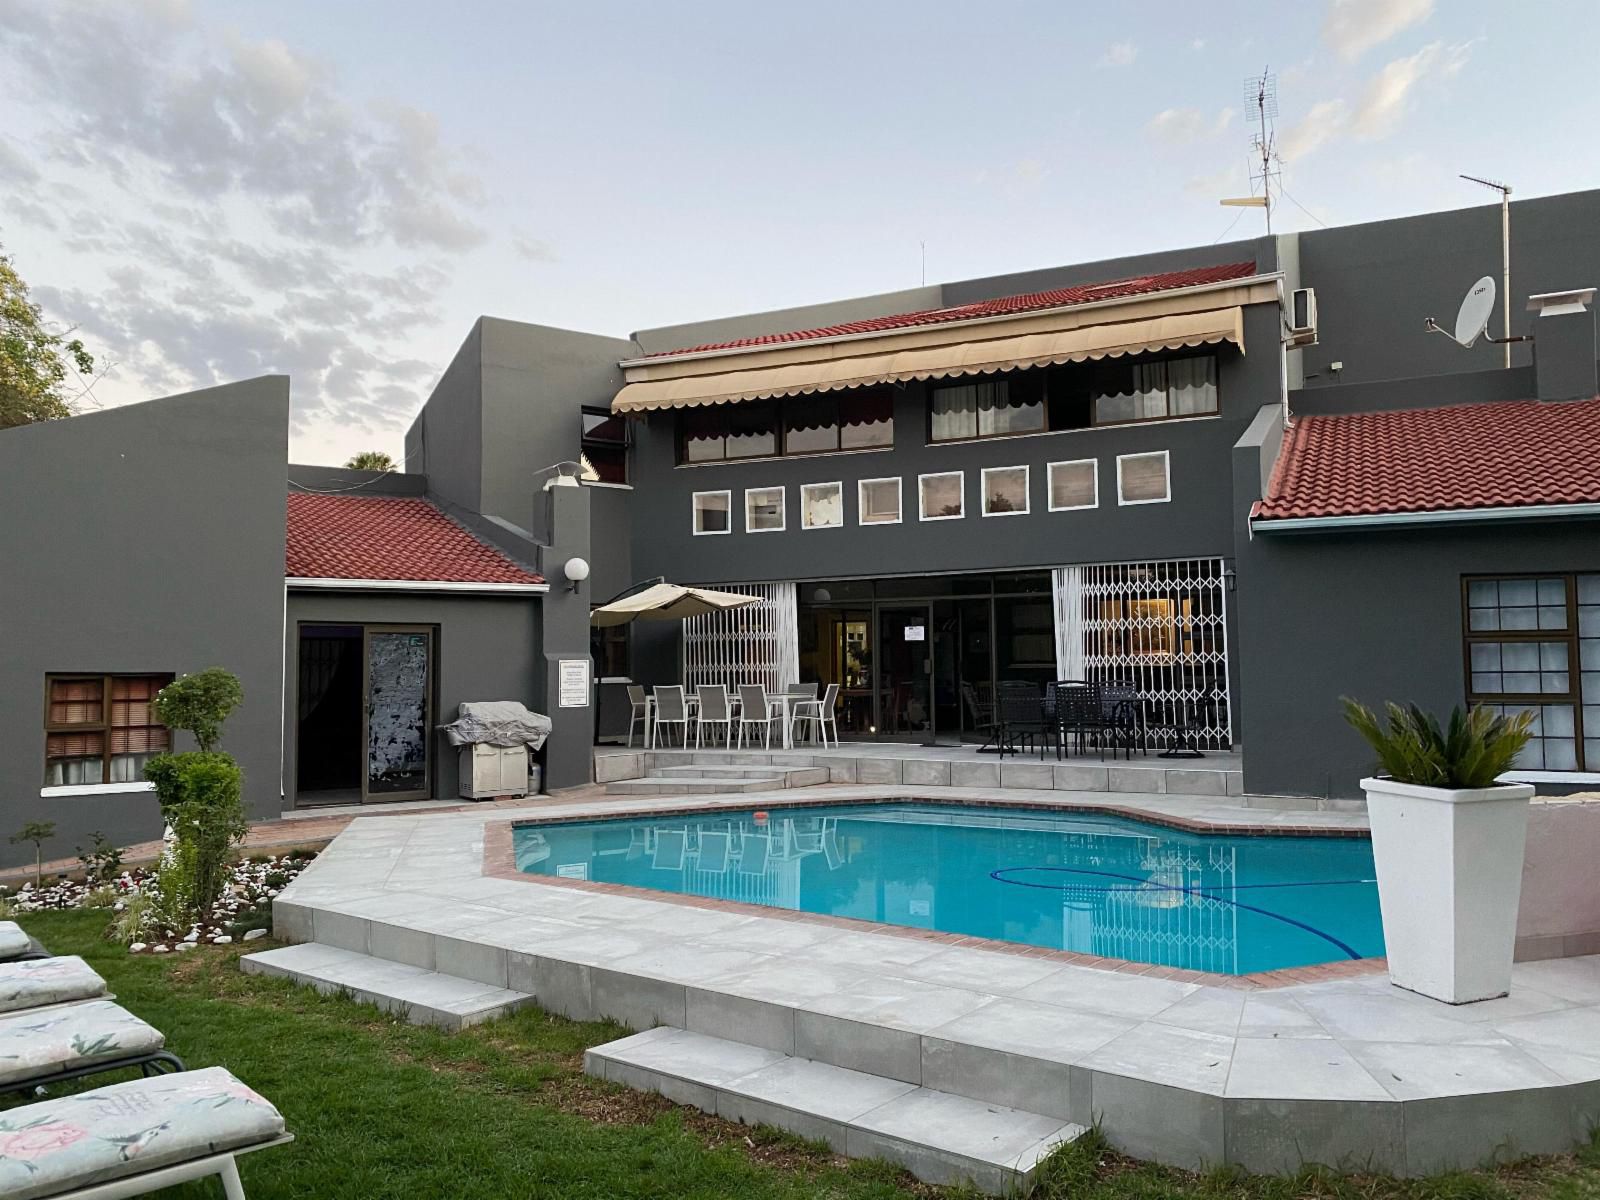 Marion Lodge Sandown Johannesburg Gauteng South Africa House, Building, Architecture, Swimming Pool